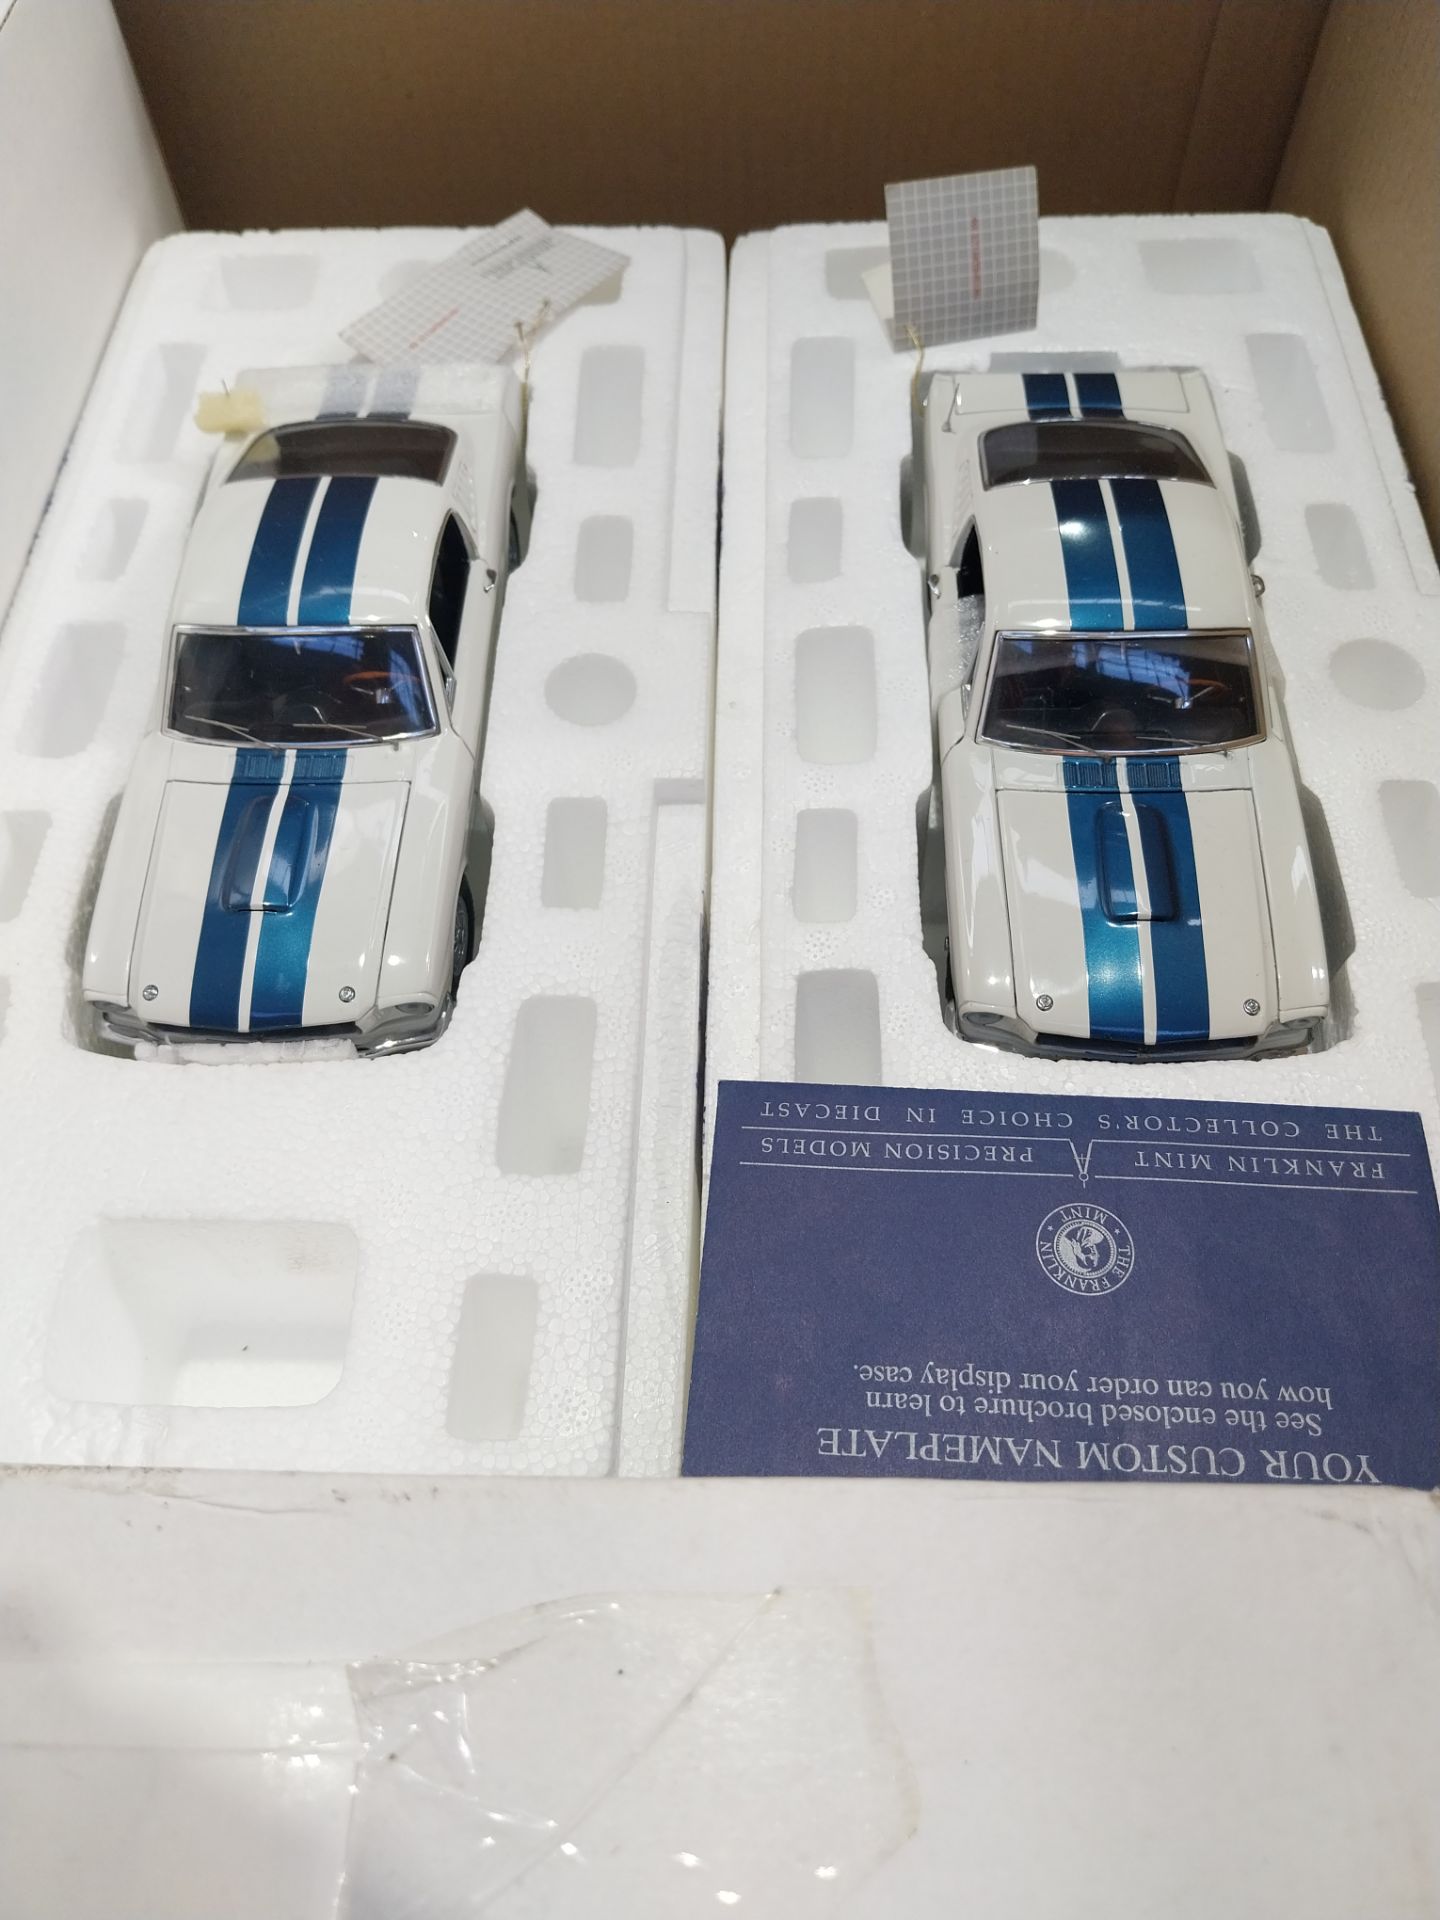 Franklin Mint, a boxed pair of 1:24 scale American 1965 Shelby GT350 models - Image 4 of 5